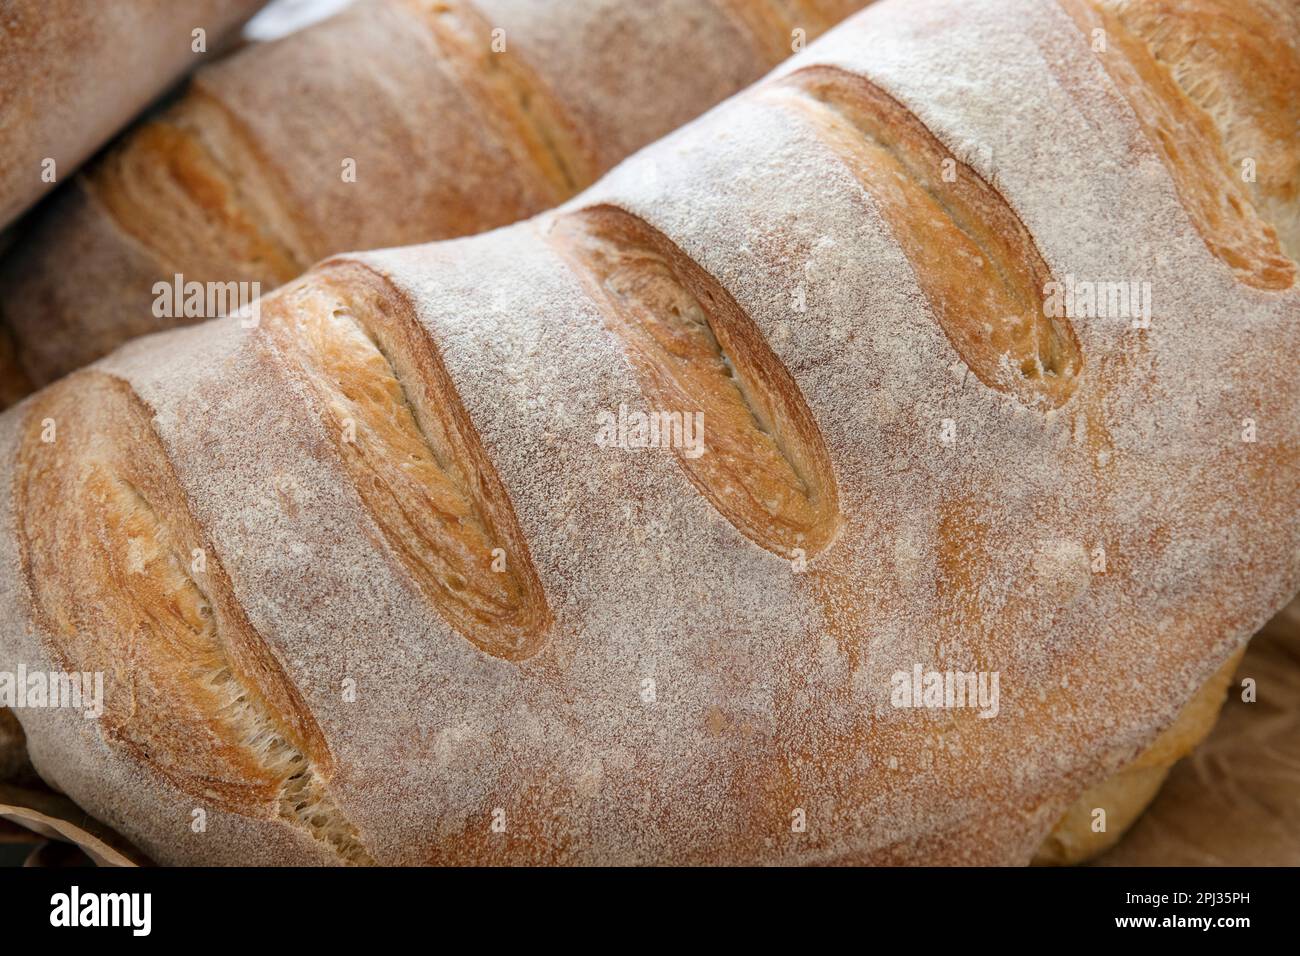 Close-up of a freshly baked sourdough bread showing a healthy golden crust, artisanal loaves leavened through a natural fermentation process Stock Photo